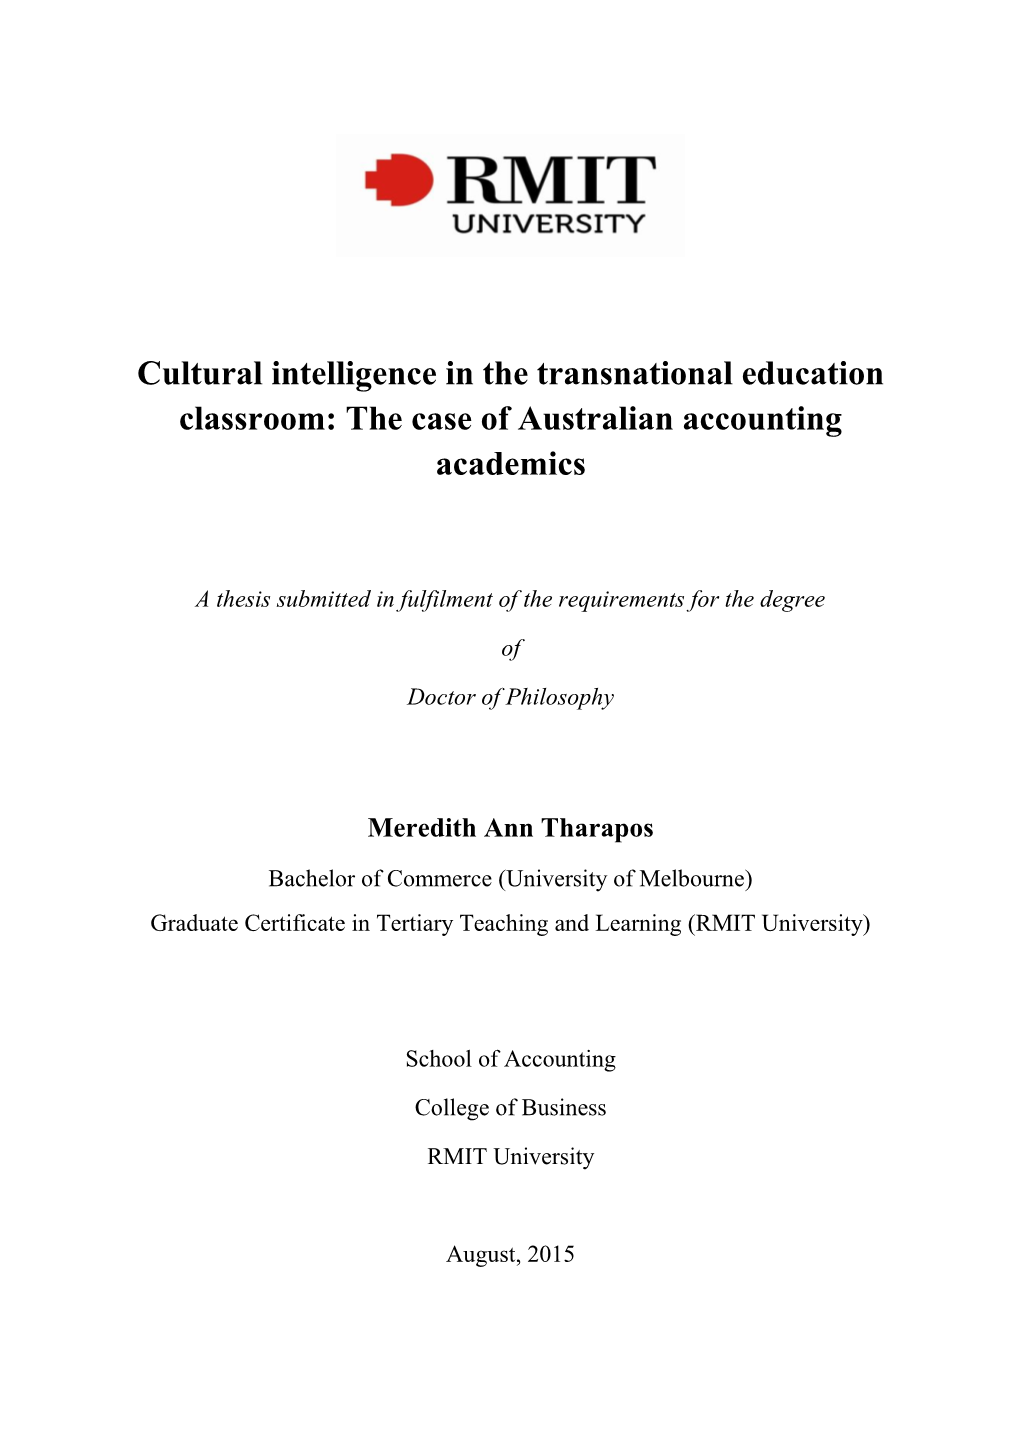 Cultural Intelligence in the Transnational Education Classroom: the Case of Australian Accounting